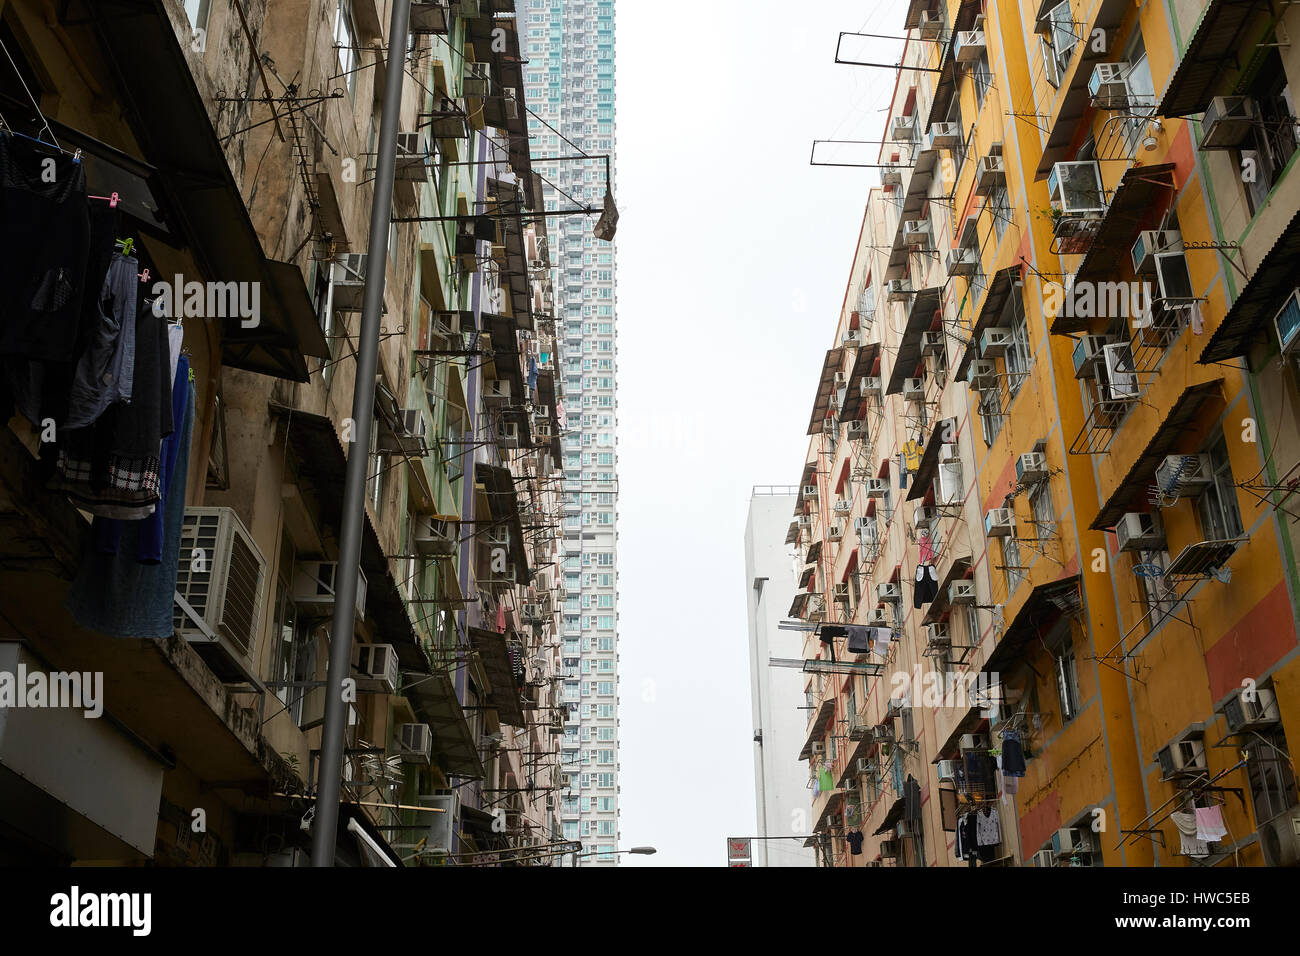 Contrasting High Rise And Low Rent Buildings In Kowloon City, Hong Kong. Stock Photo